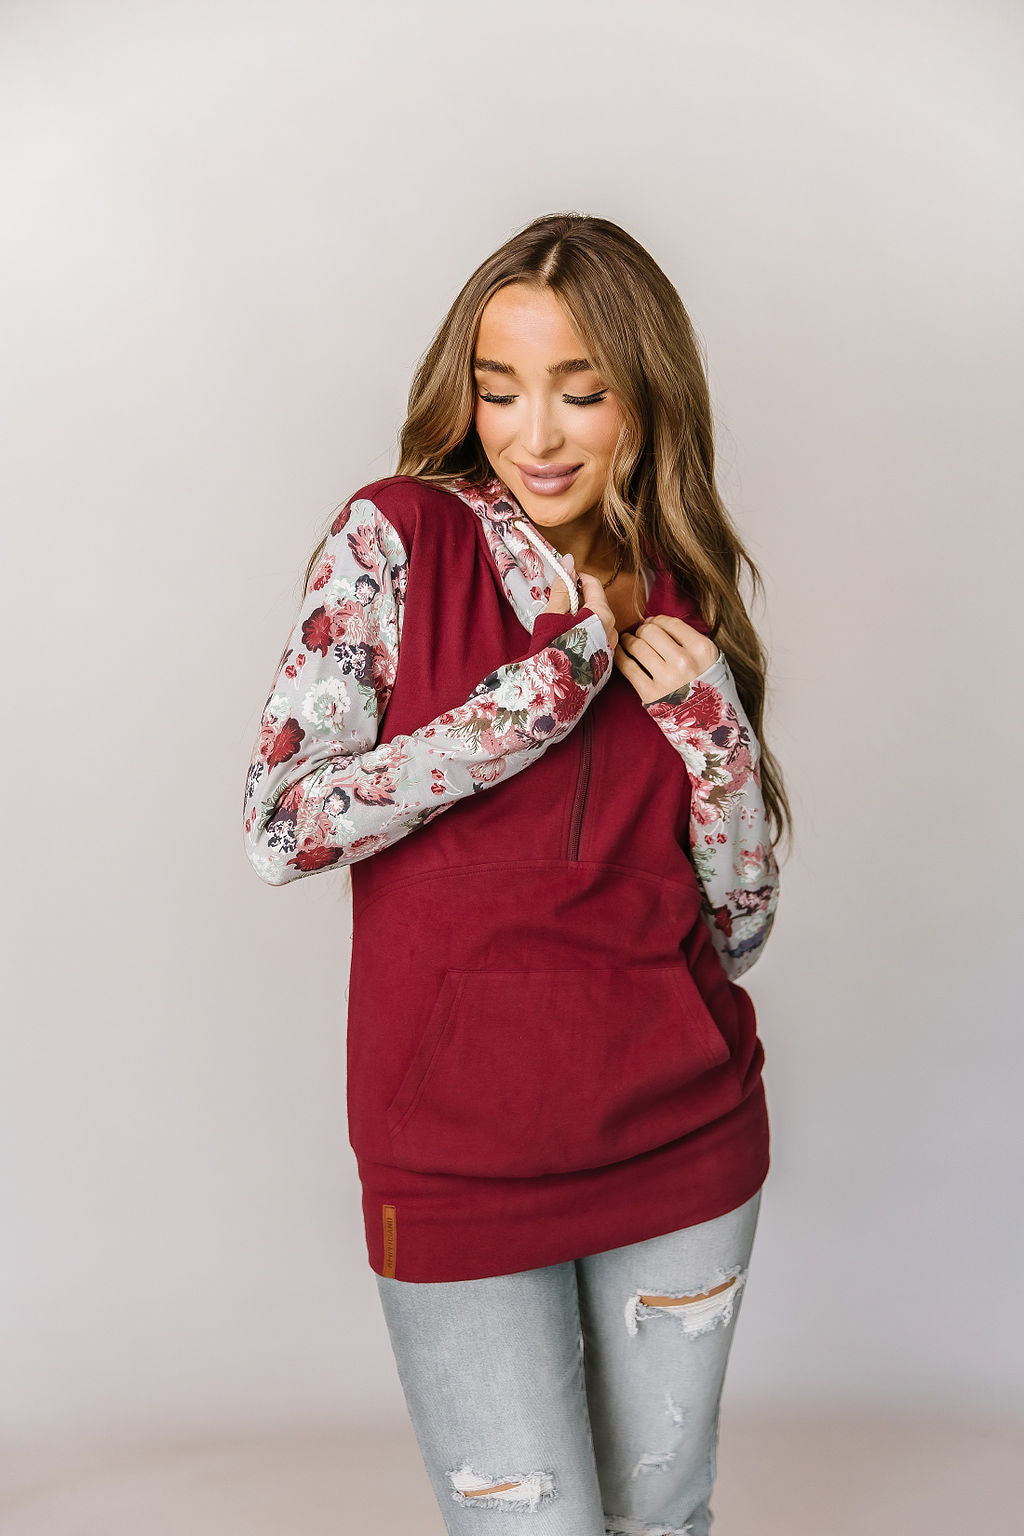 NEW ~ Ampersand Halfzip Sweatshirt - Among the Wildflowers ~ Deep Red~ Available in Curvy!